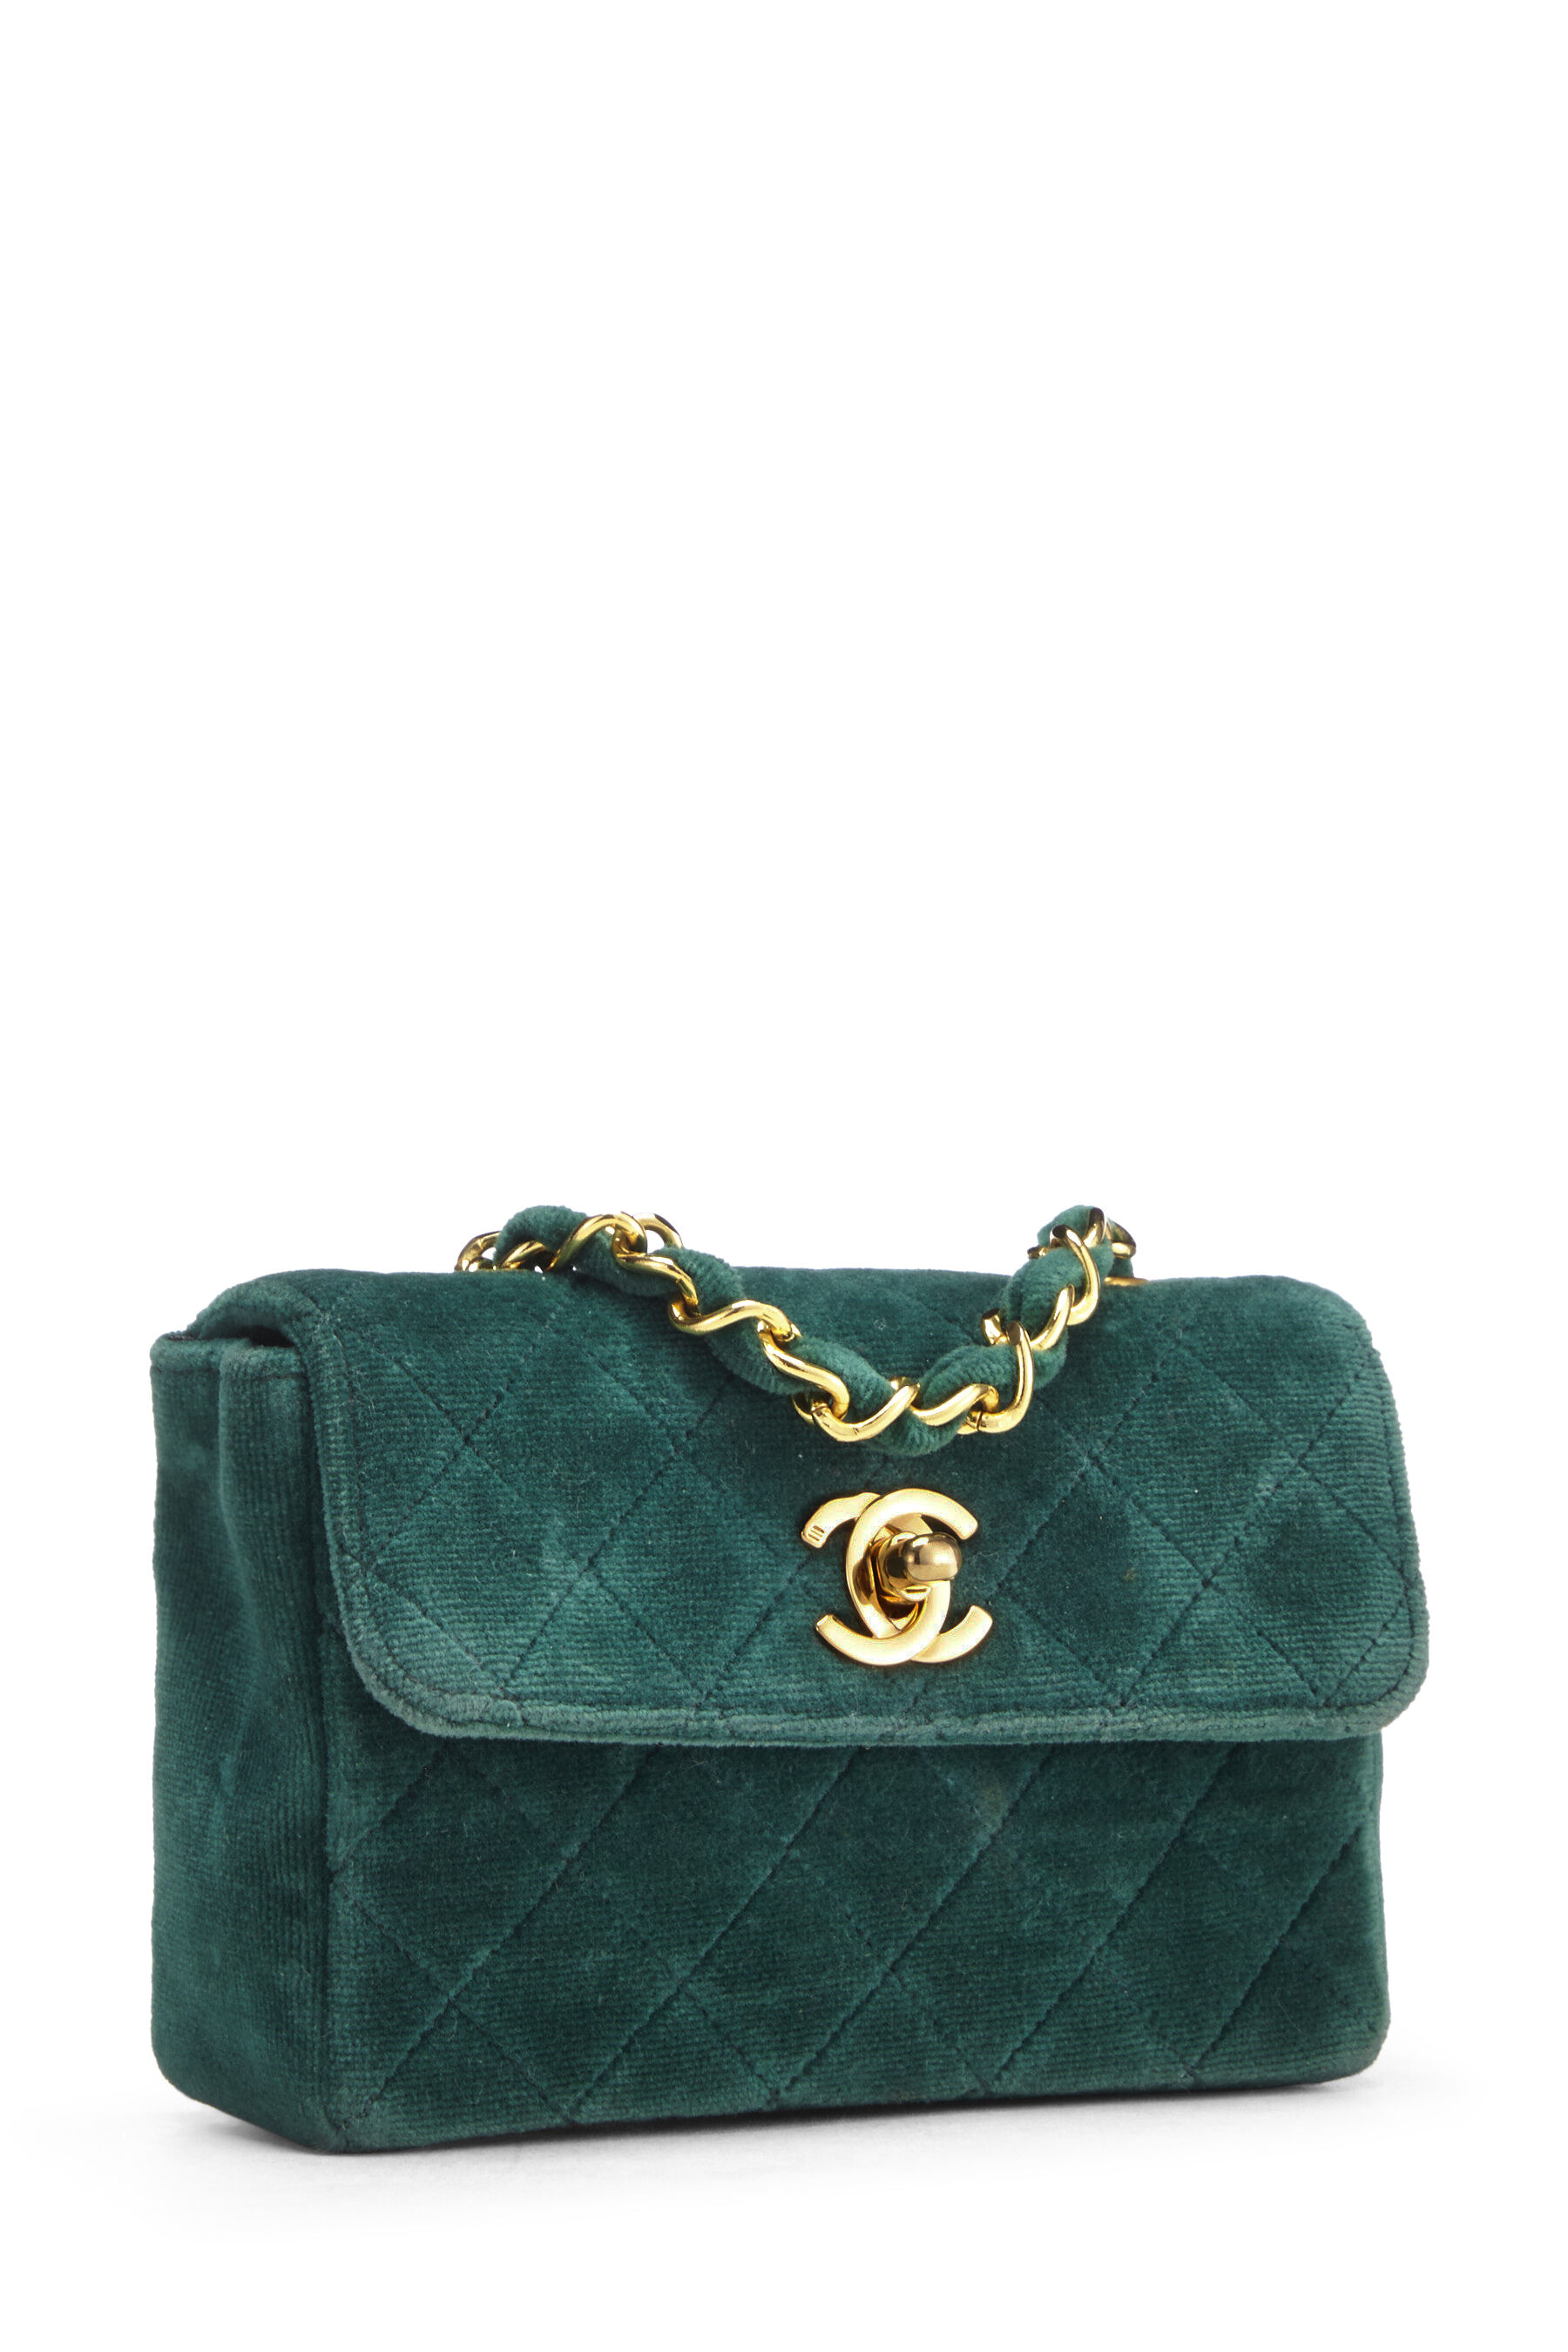 Chanel - Green Quilted Velvet Half Flap Micro